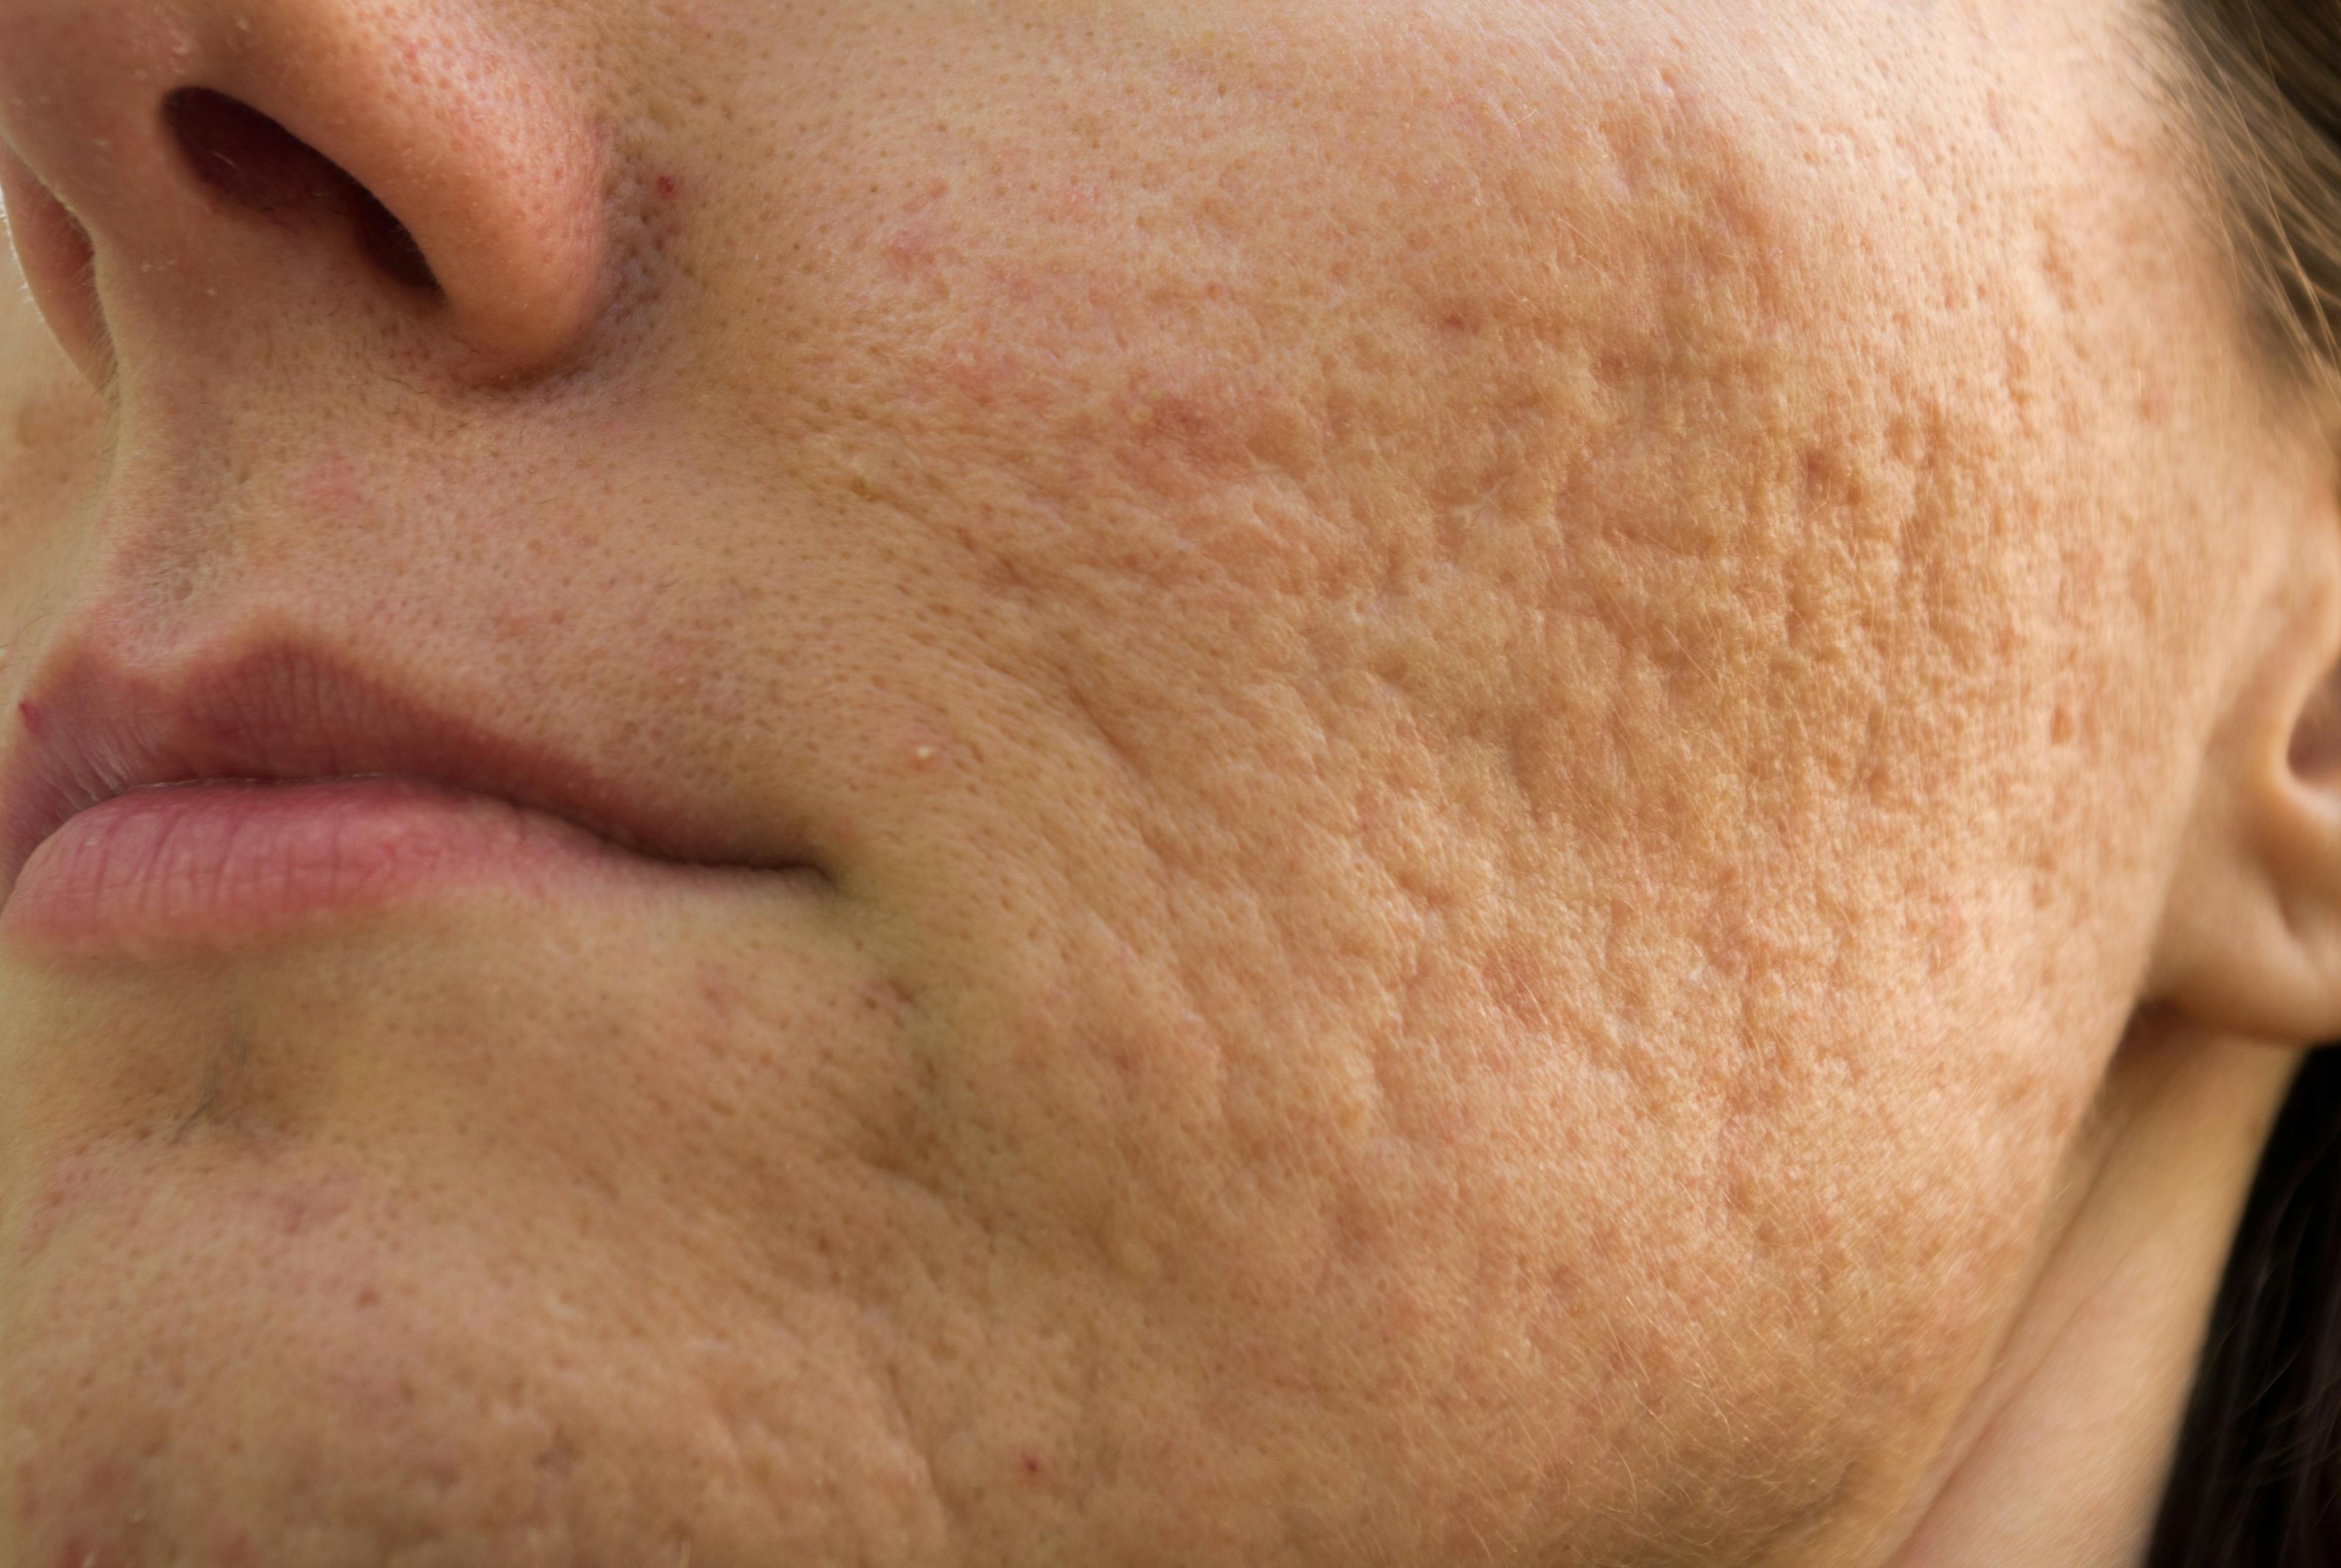 Acne May Impair Sleep Quality for Adult Patients